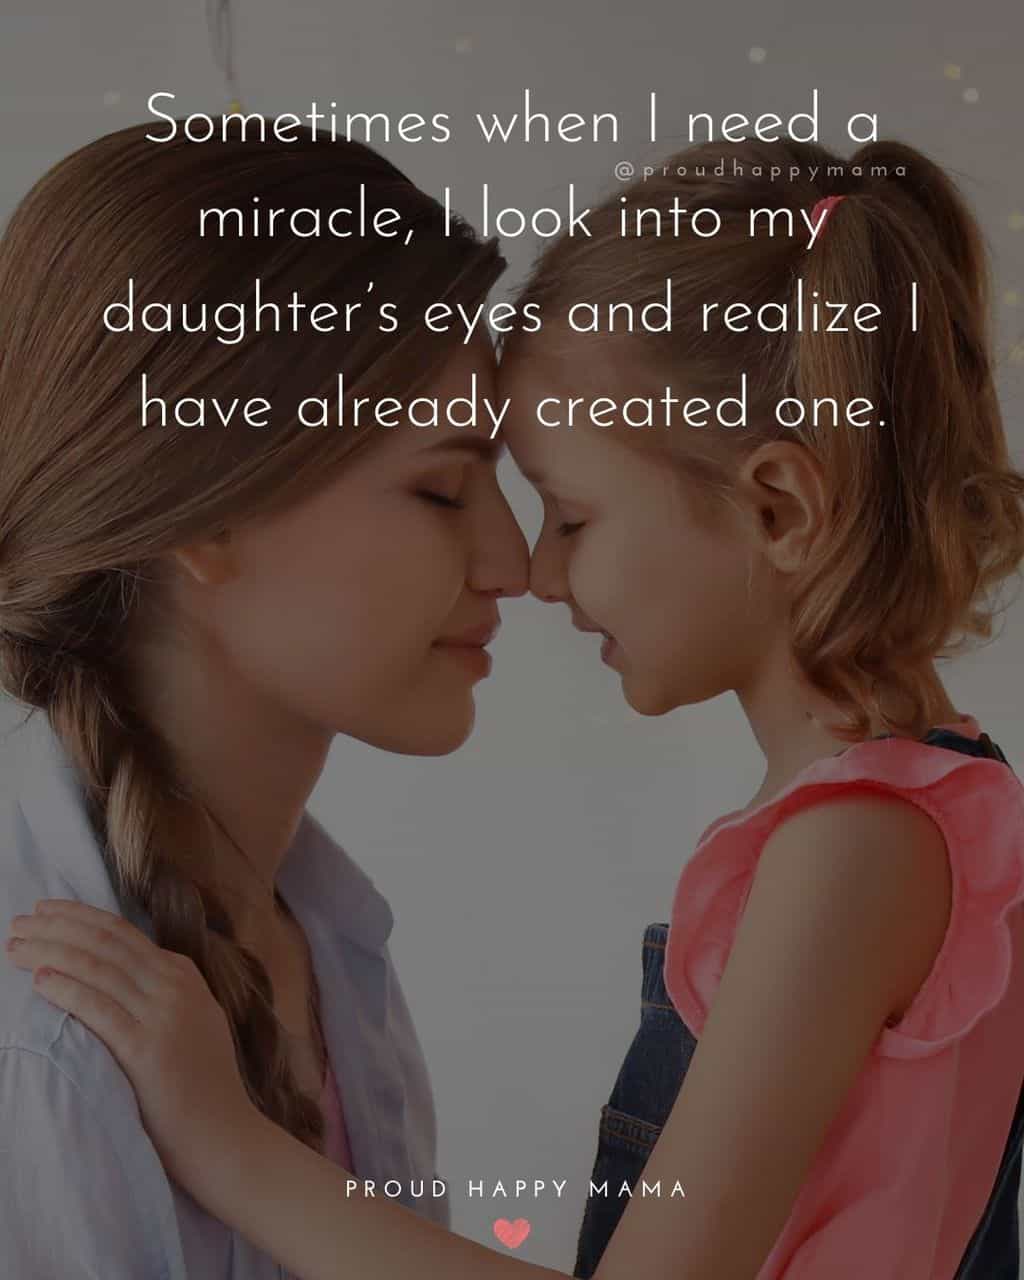 daughter cute quotes - ‘Sometimes when I need a miracle, I look into my daughter’s eyes and realize I have already created one.’